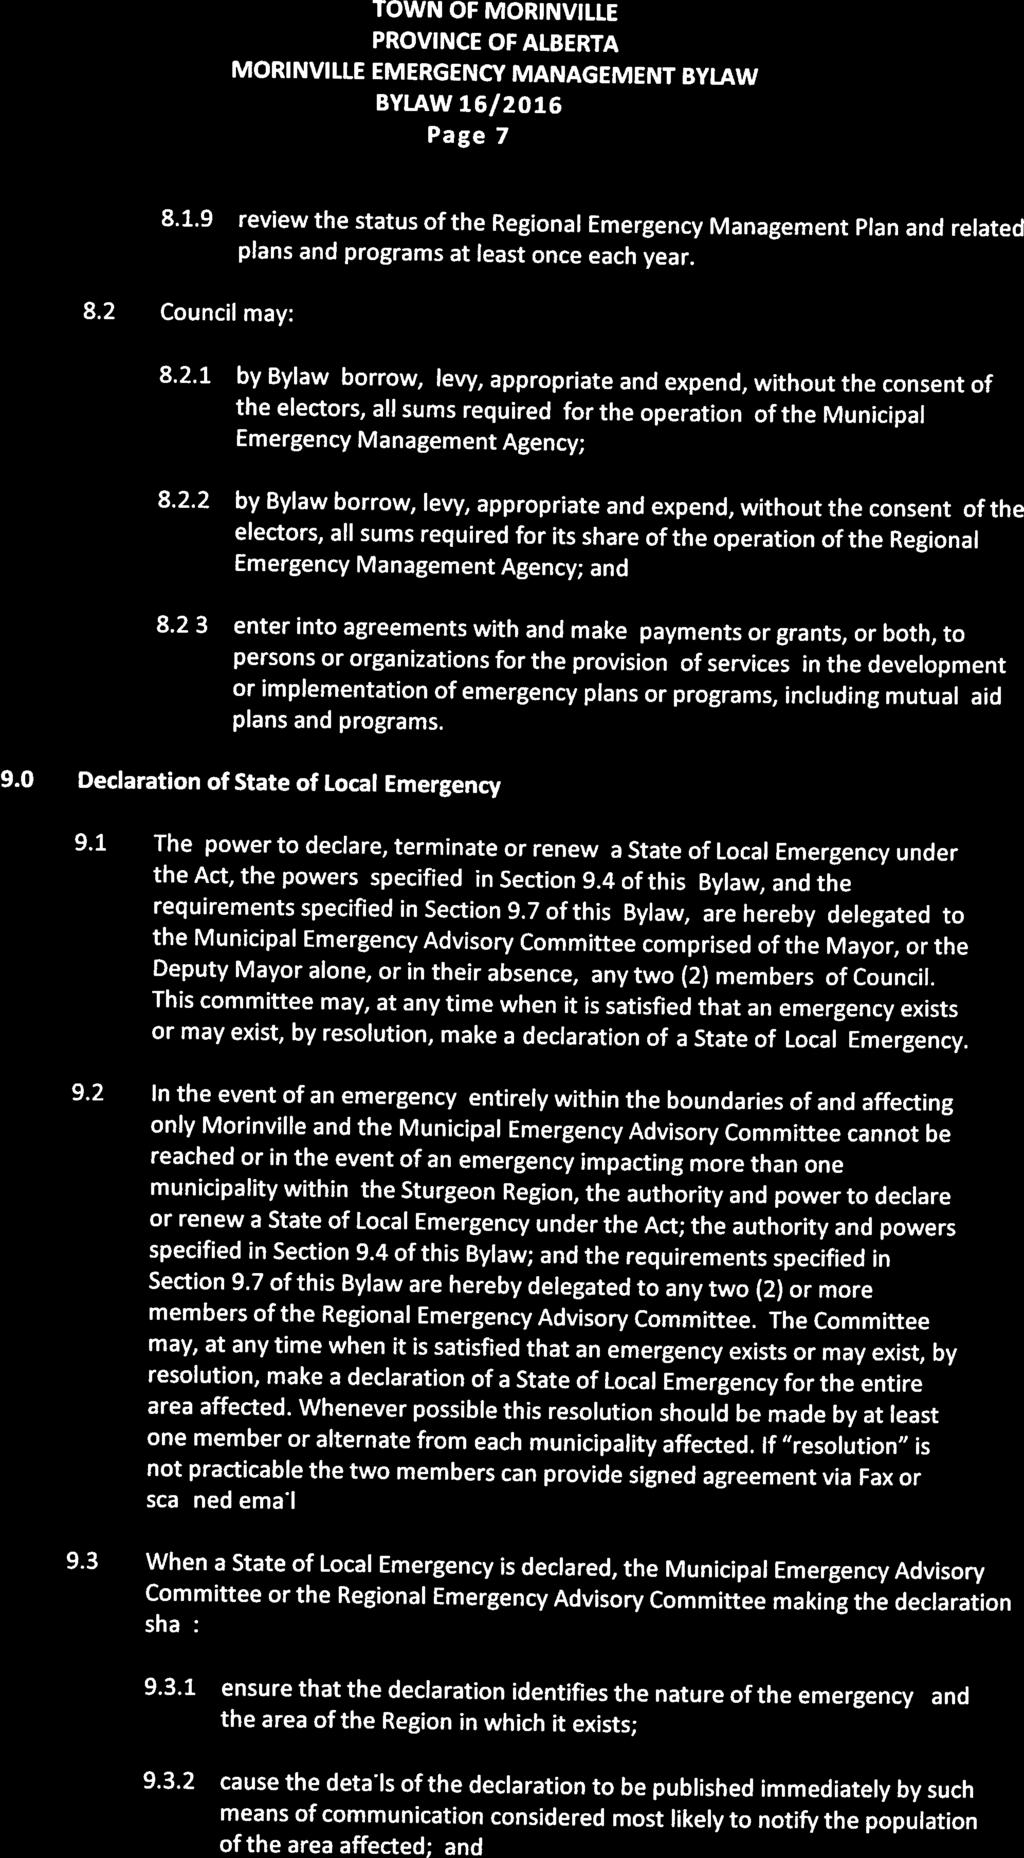 TWN F MRINVILLE MRINVI LIE EMERGENCY MANAGEMENT BYLAW Page 7 8.1.9 review the status of the Regional Emergency Management Plan and related plans and programs at least once each year. 8.2 Council may: 8.